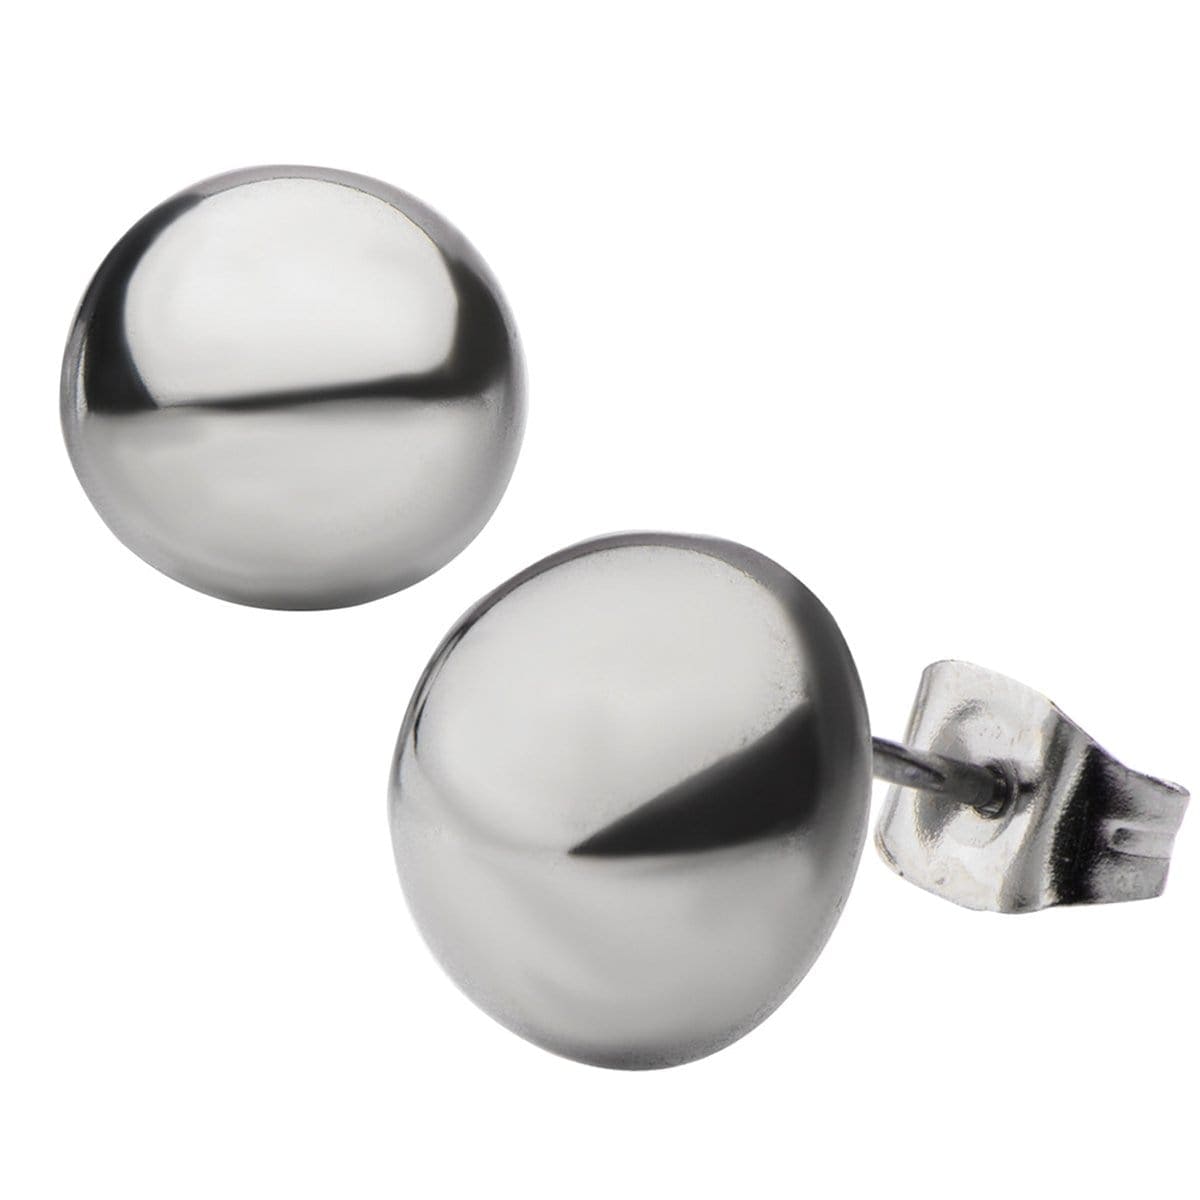 INOX JEWELRY Earrings Silver Tone Stainless Steel Small Round Dome Studs SSE4710